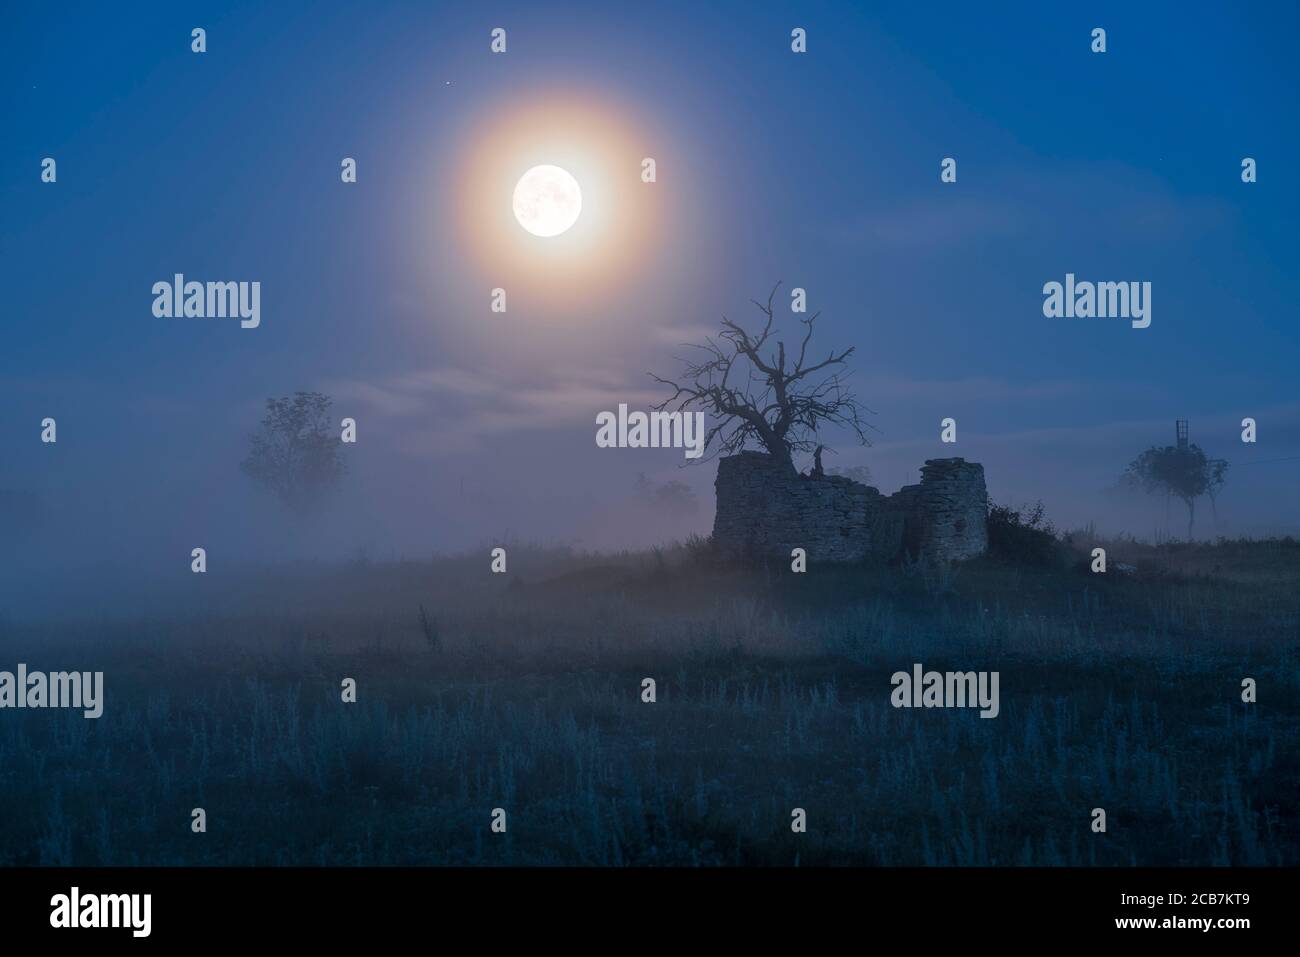 Full moon moonlight over dead tree inside the ruins of an old windmill in rural landscape and fog, Gotland, Sweden, Scandinavia. Stock Photo